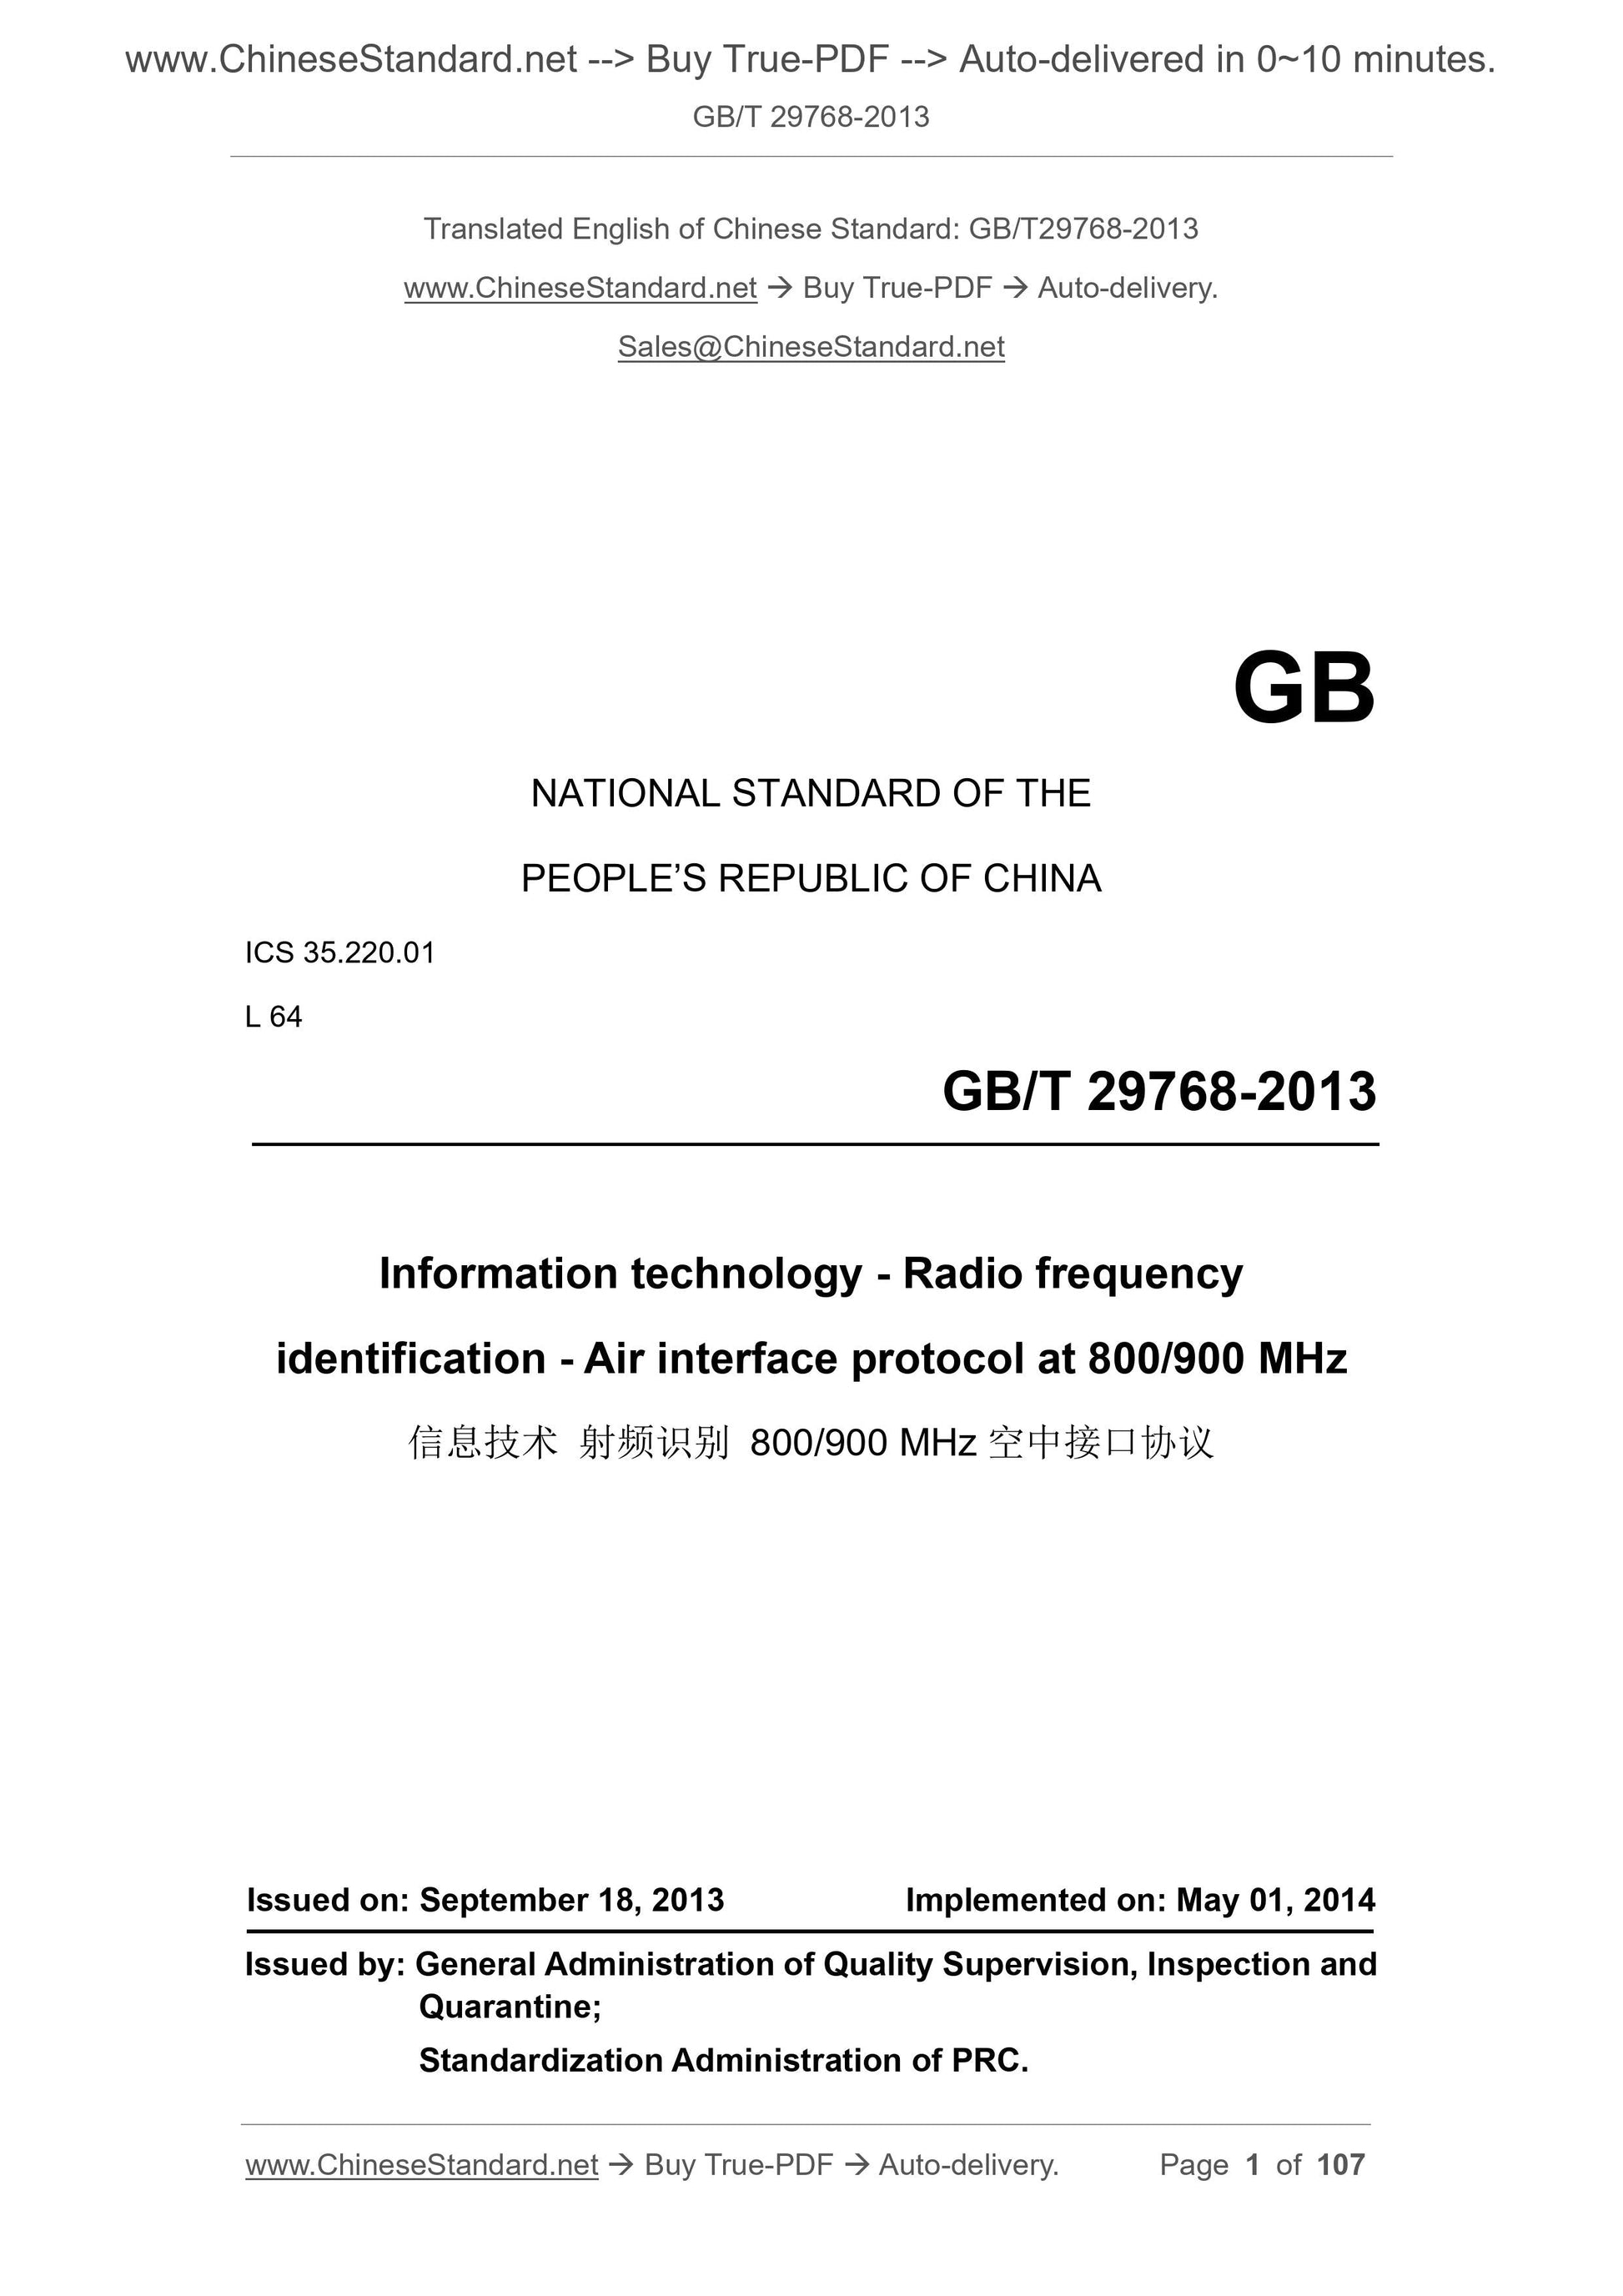 GB/T 29768-2013 Page 1